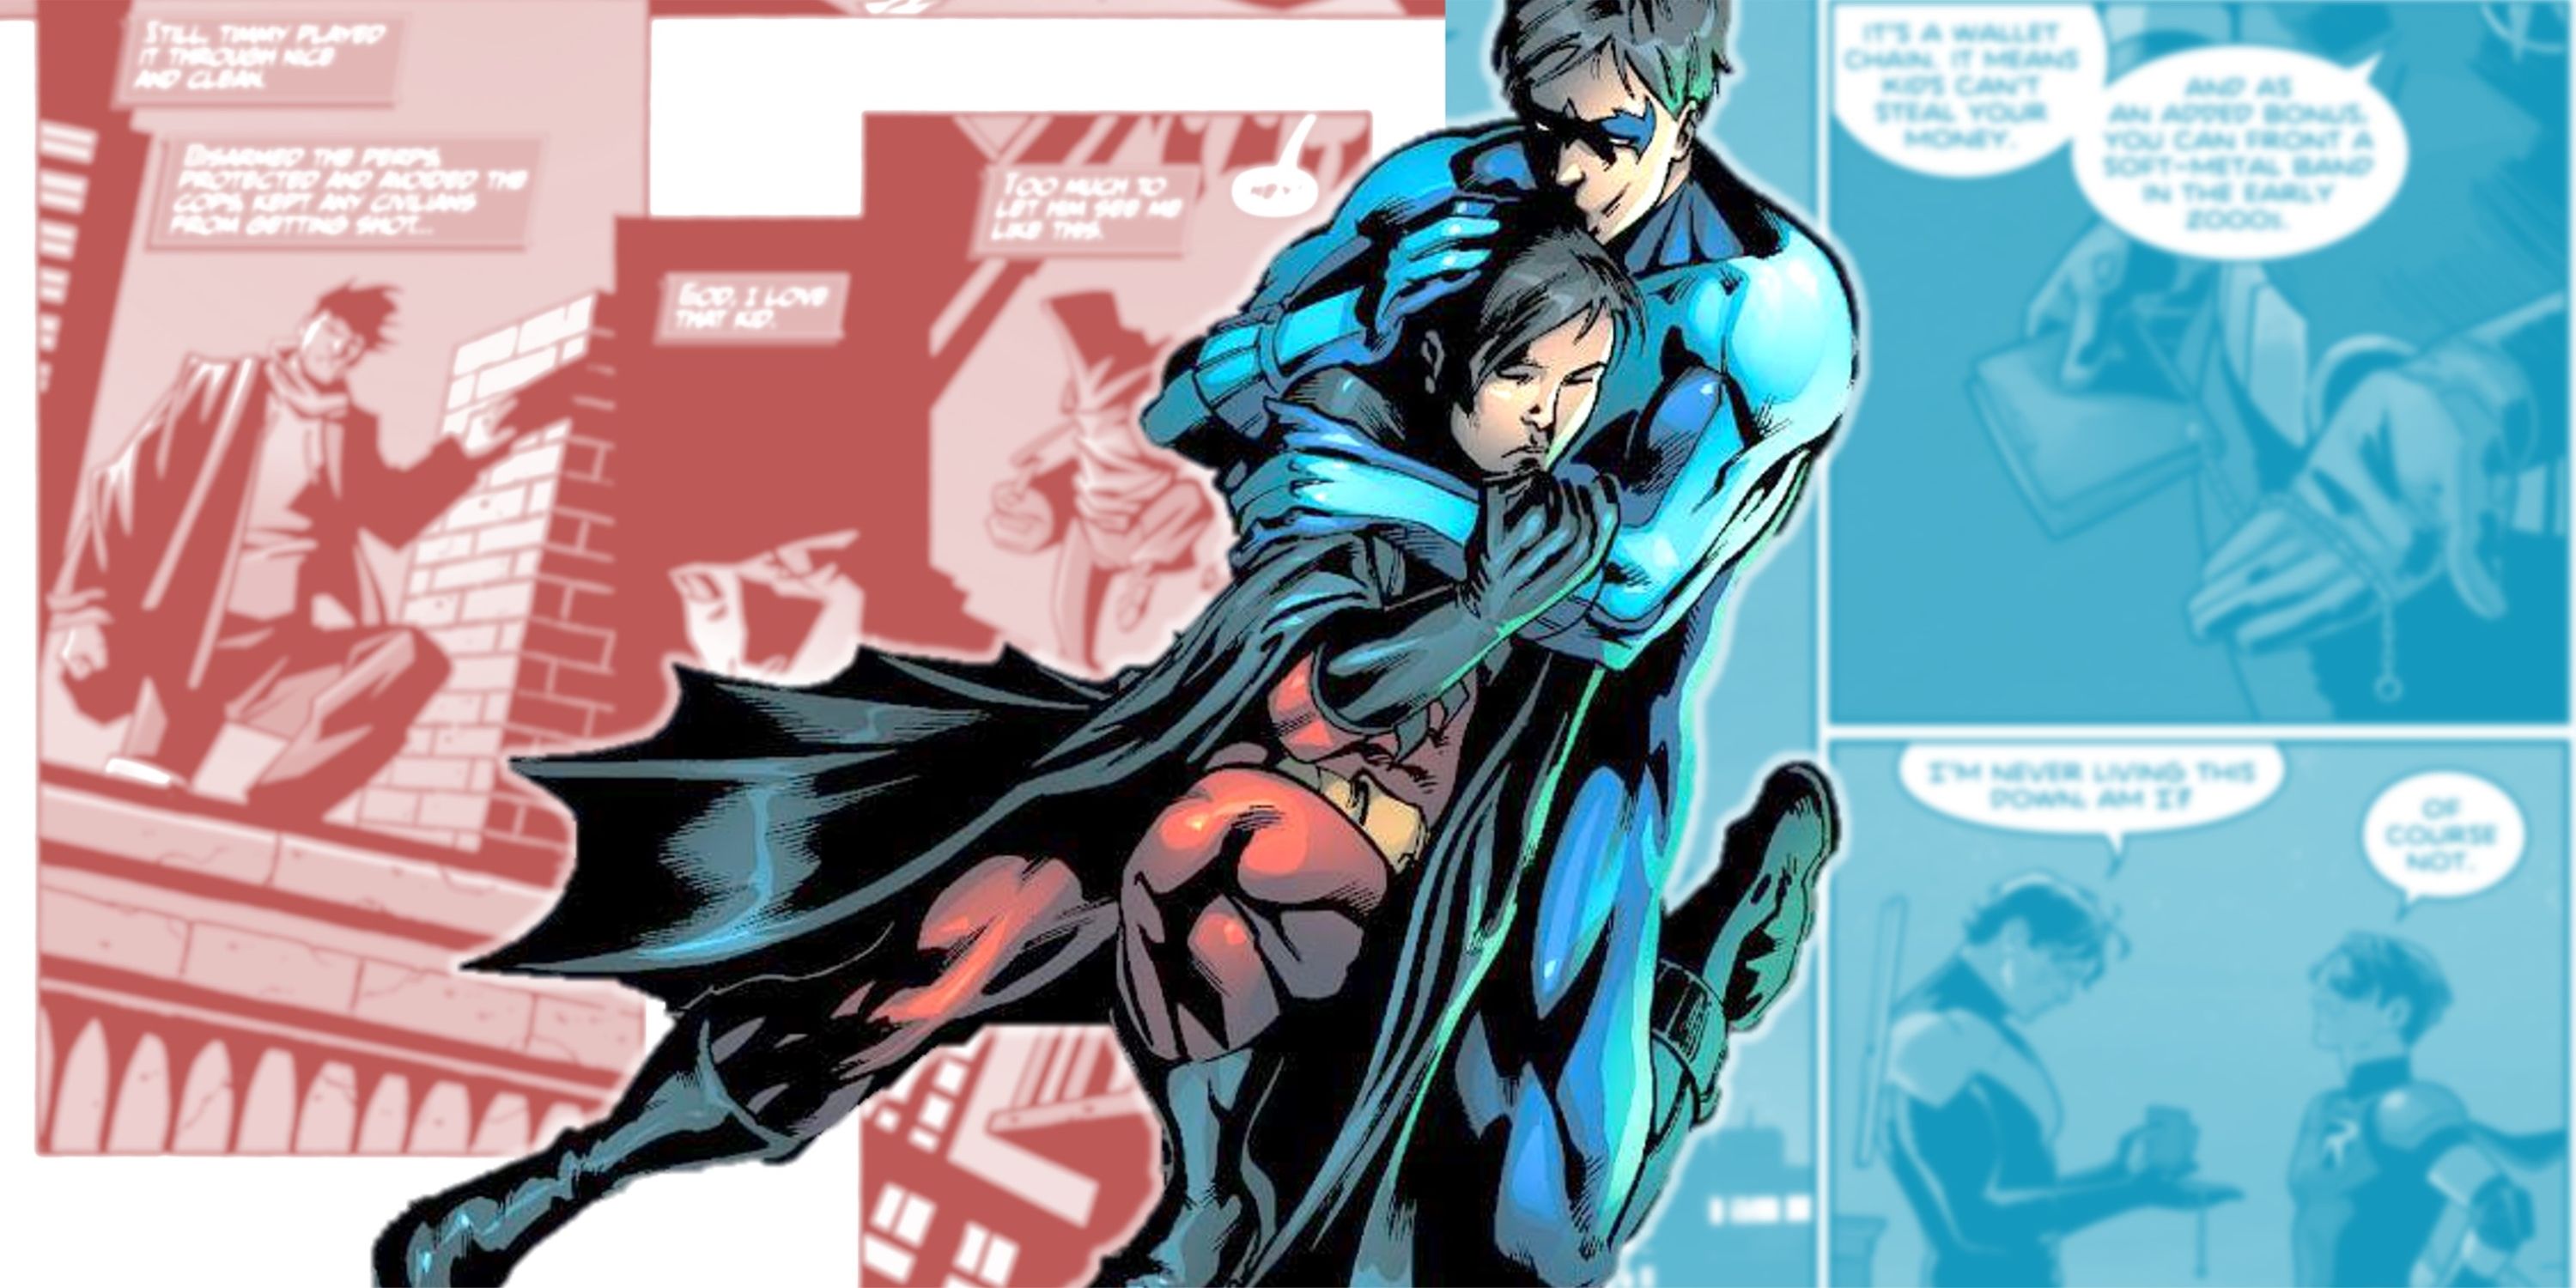 Composite image of Tim Drake and Dick Grayson embracing superimposed over blurred panels of the two of them